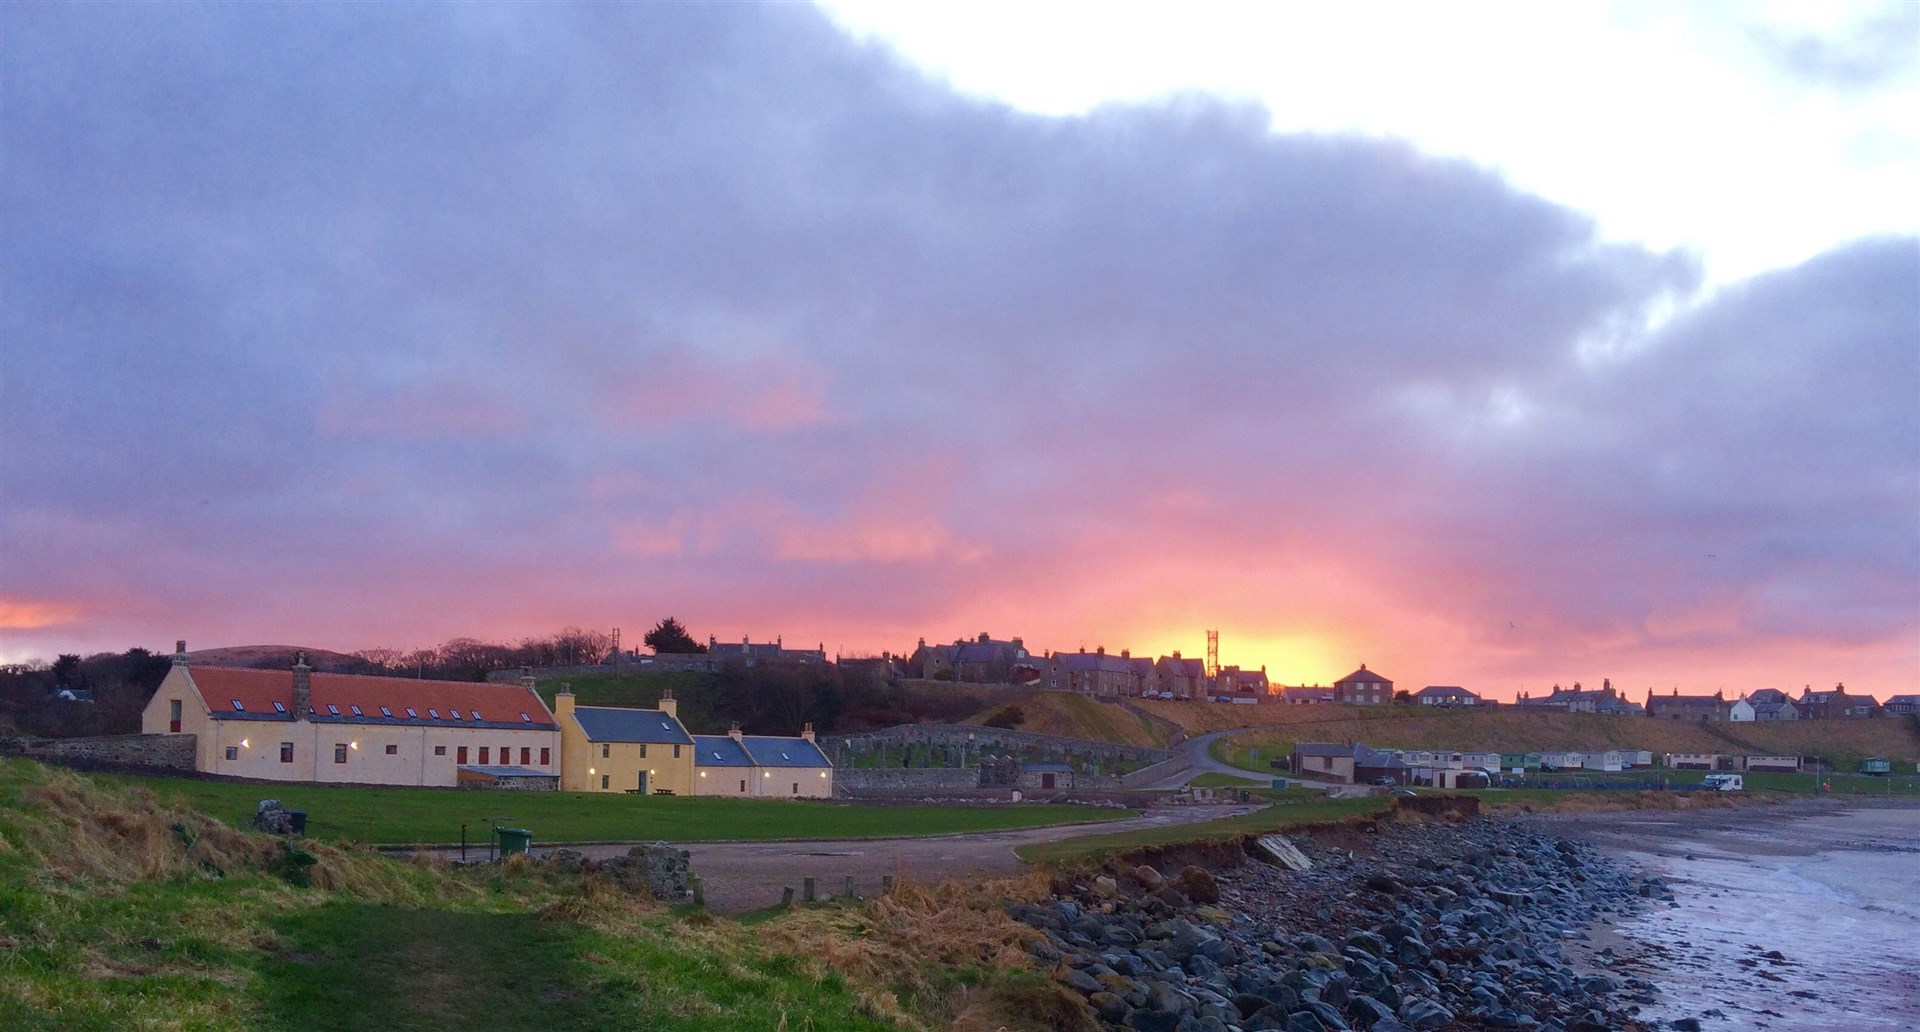 The Sail Loft Bunkhouse is located at Portsoy's Back Green.